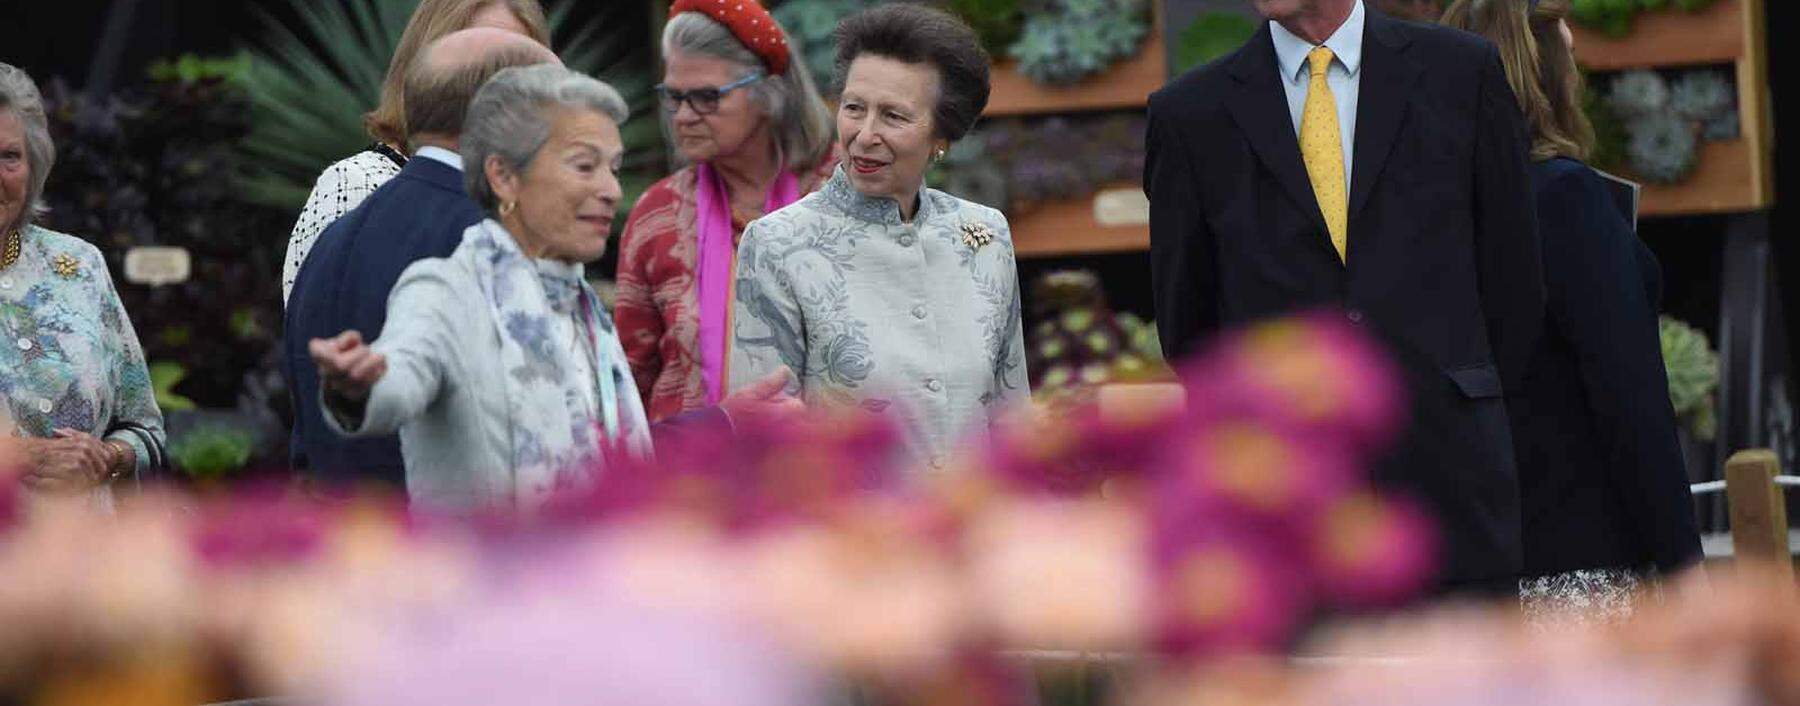 . 20/09/2021. London, United Kingdom. Princess Anne, The Princess Royal , during a visit at the Chelsea Flower Show in